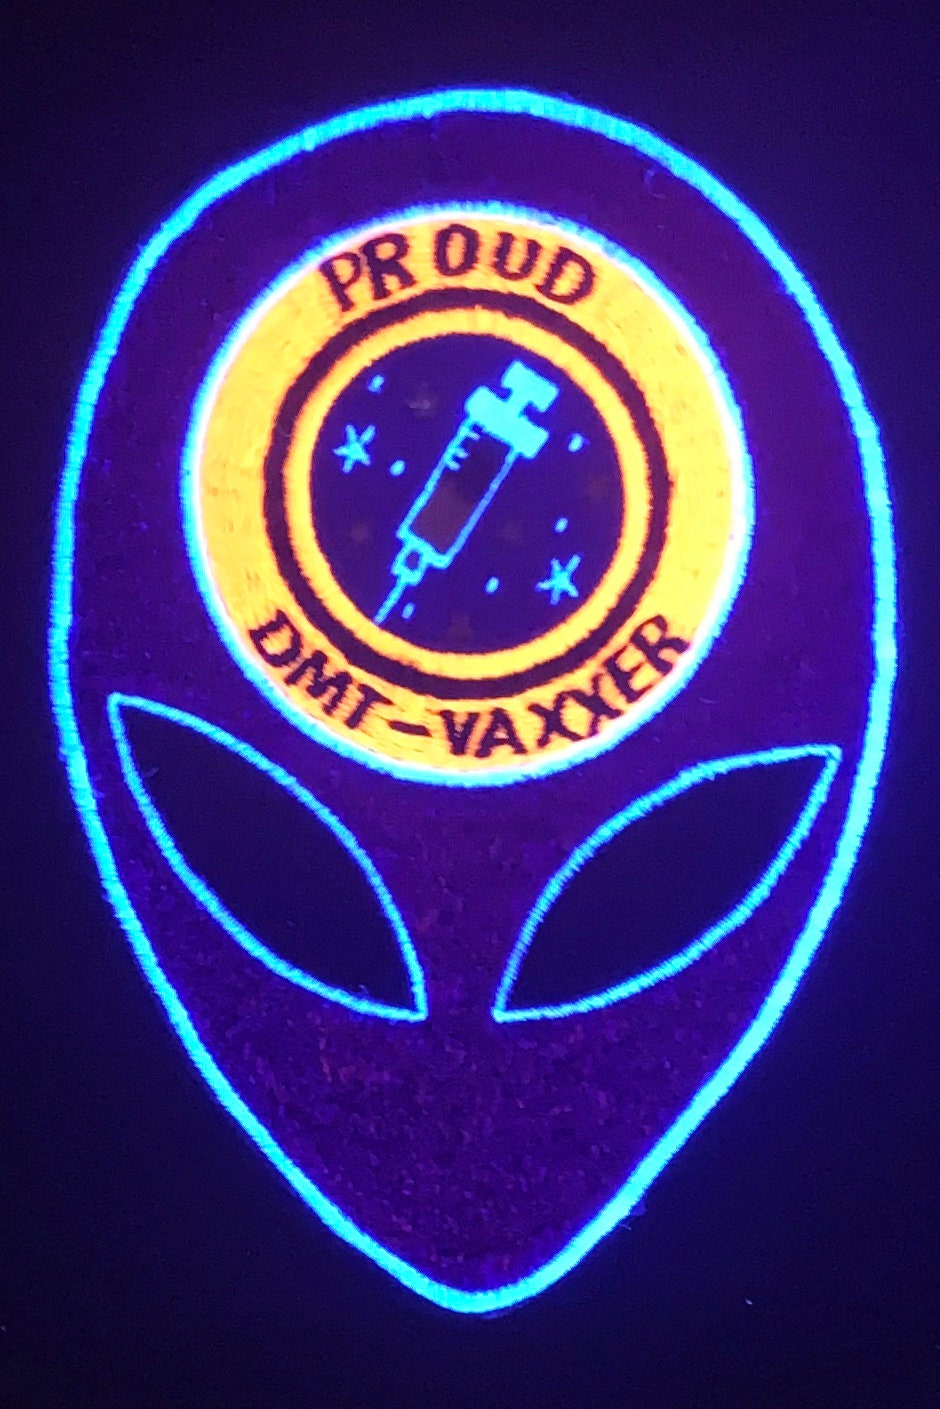 Proud DMT vaxxer Patch psychedelic pink Alien LSD extraterrestrial funny vaccination joke nearby alien dimension glitter embroidery art